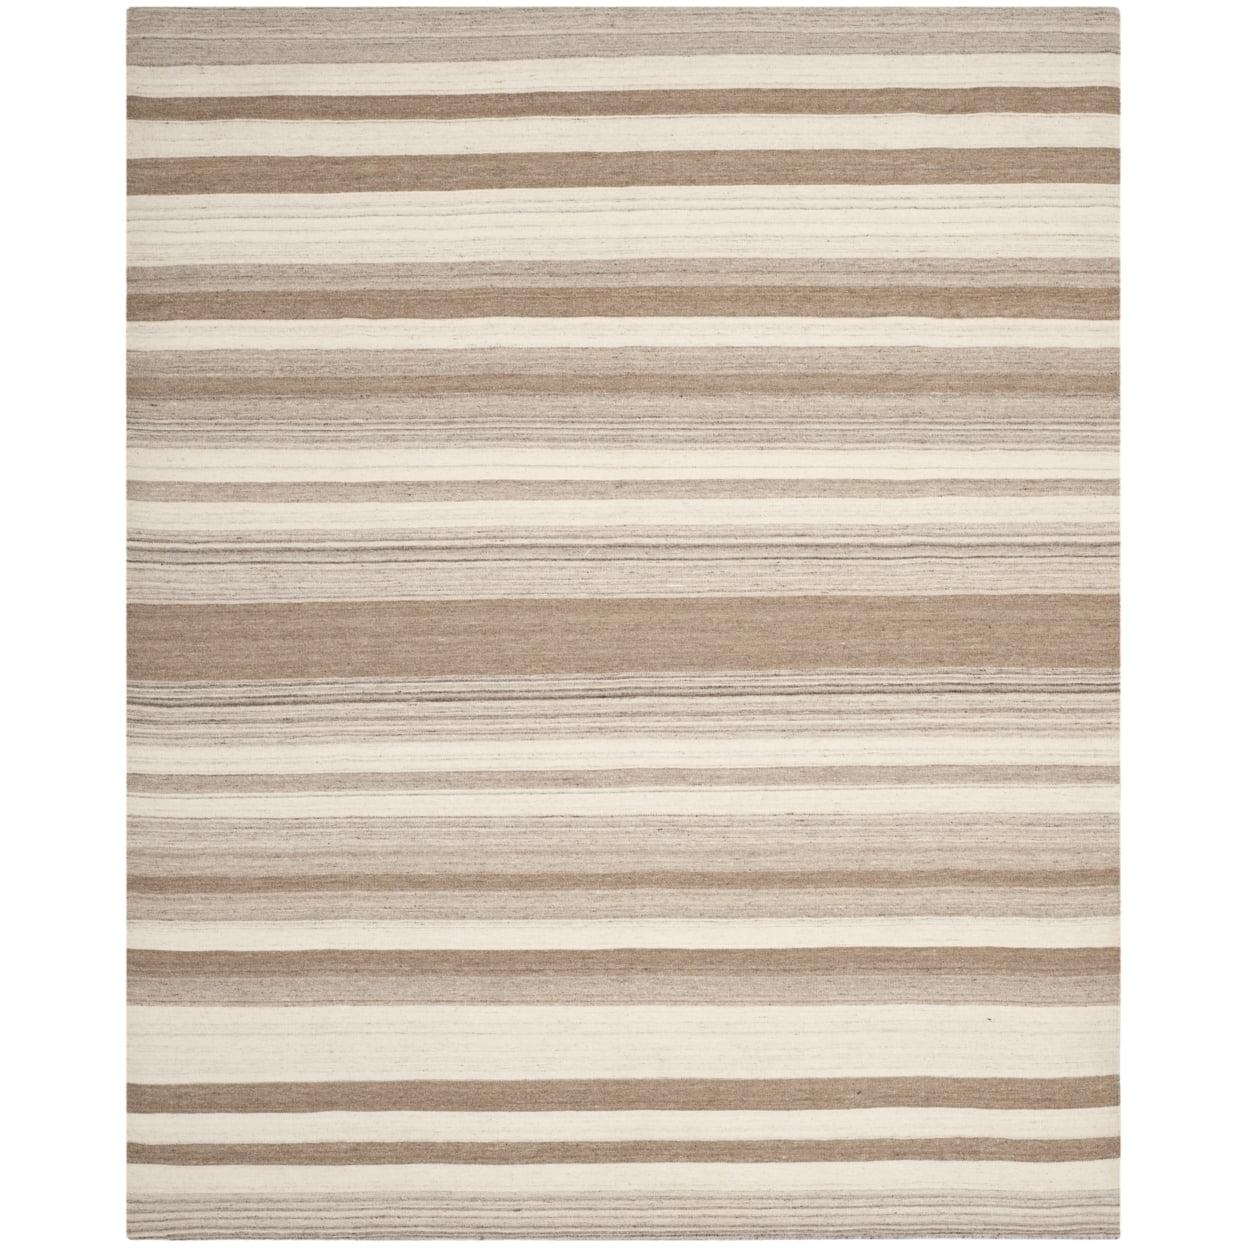 Natural Camel 9' x 12' Flat Woven Wool Striped Area Rug